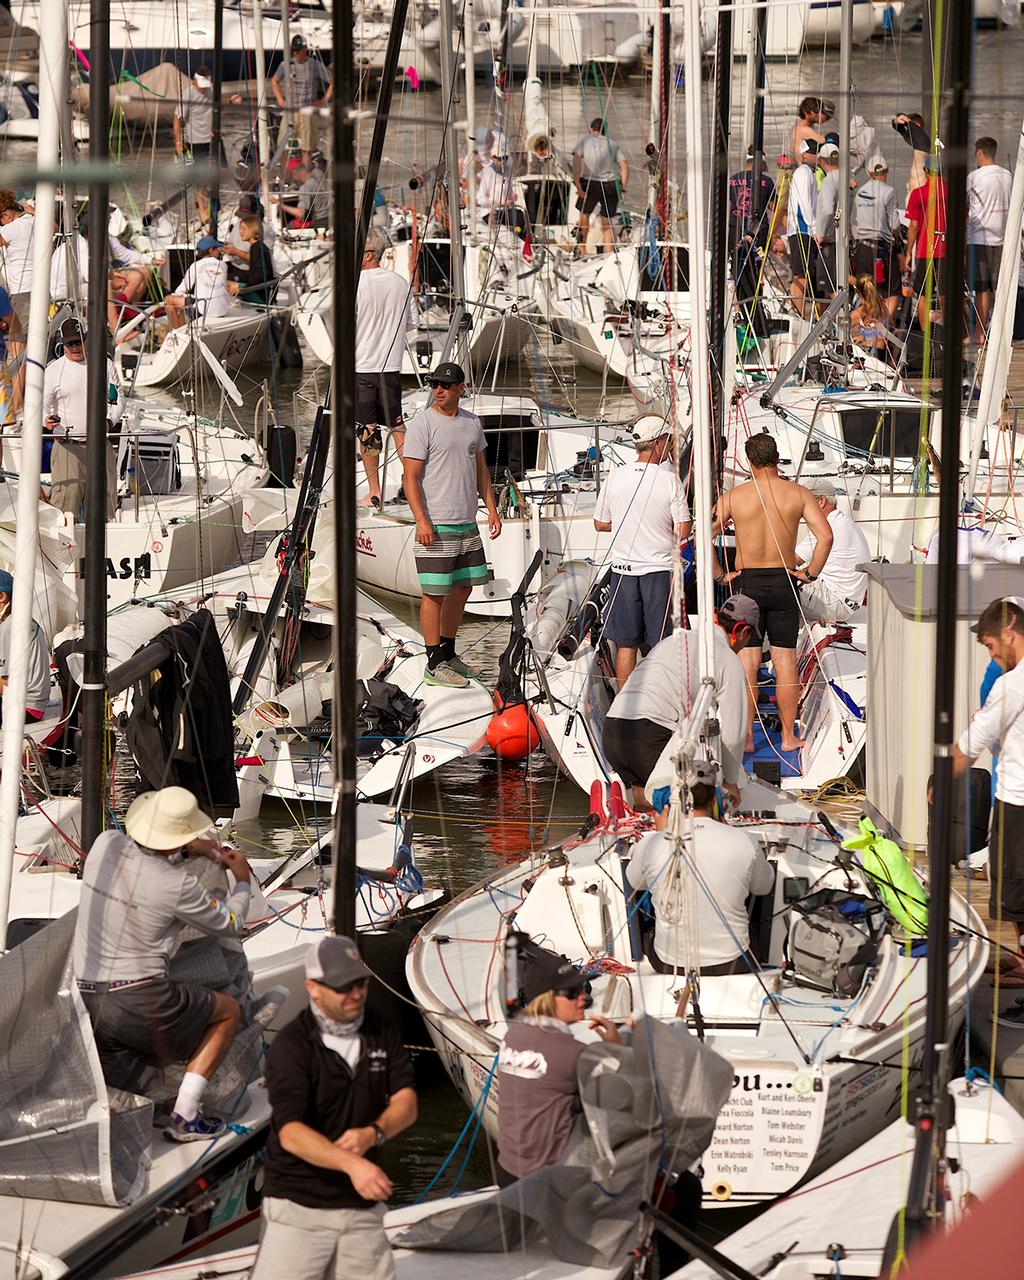 It’s organized chaos at Charleston Harbor Resort & Marina and the College of Charleston Sailing Center with hundreds of boats tied up in a web of knots for Sperry Charlesto Race Week 2017. Amazingly, it takes just a few minutes for all of them to slip out of their spots and head off to the races. © Meredith Block/ Charleston Race Week http://www.charlestonraceweek.com/